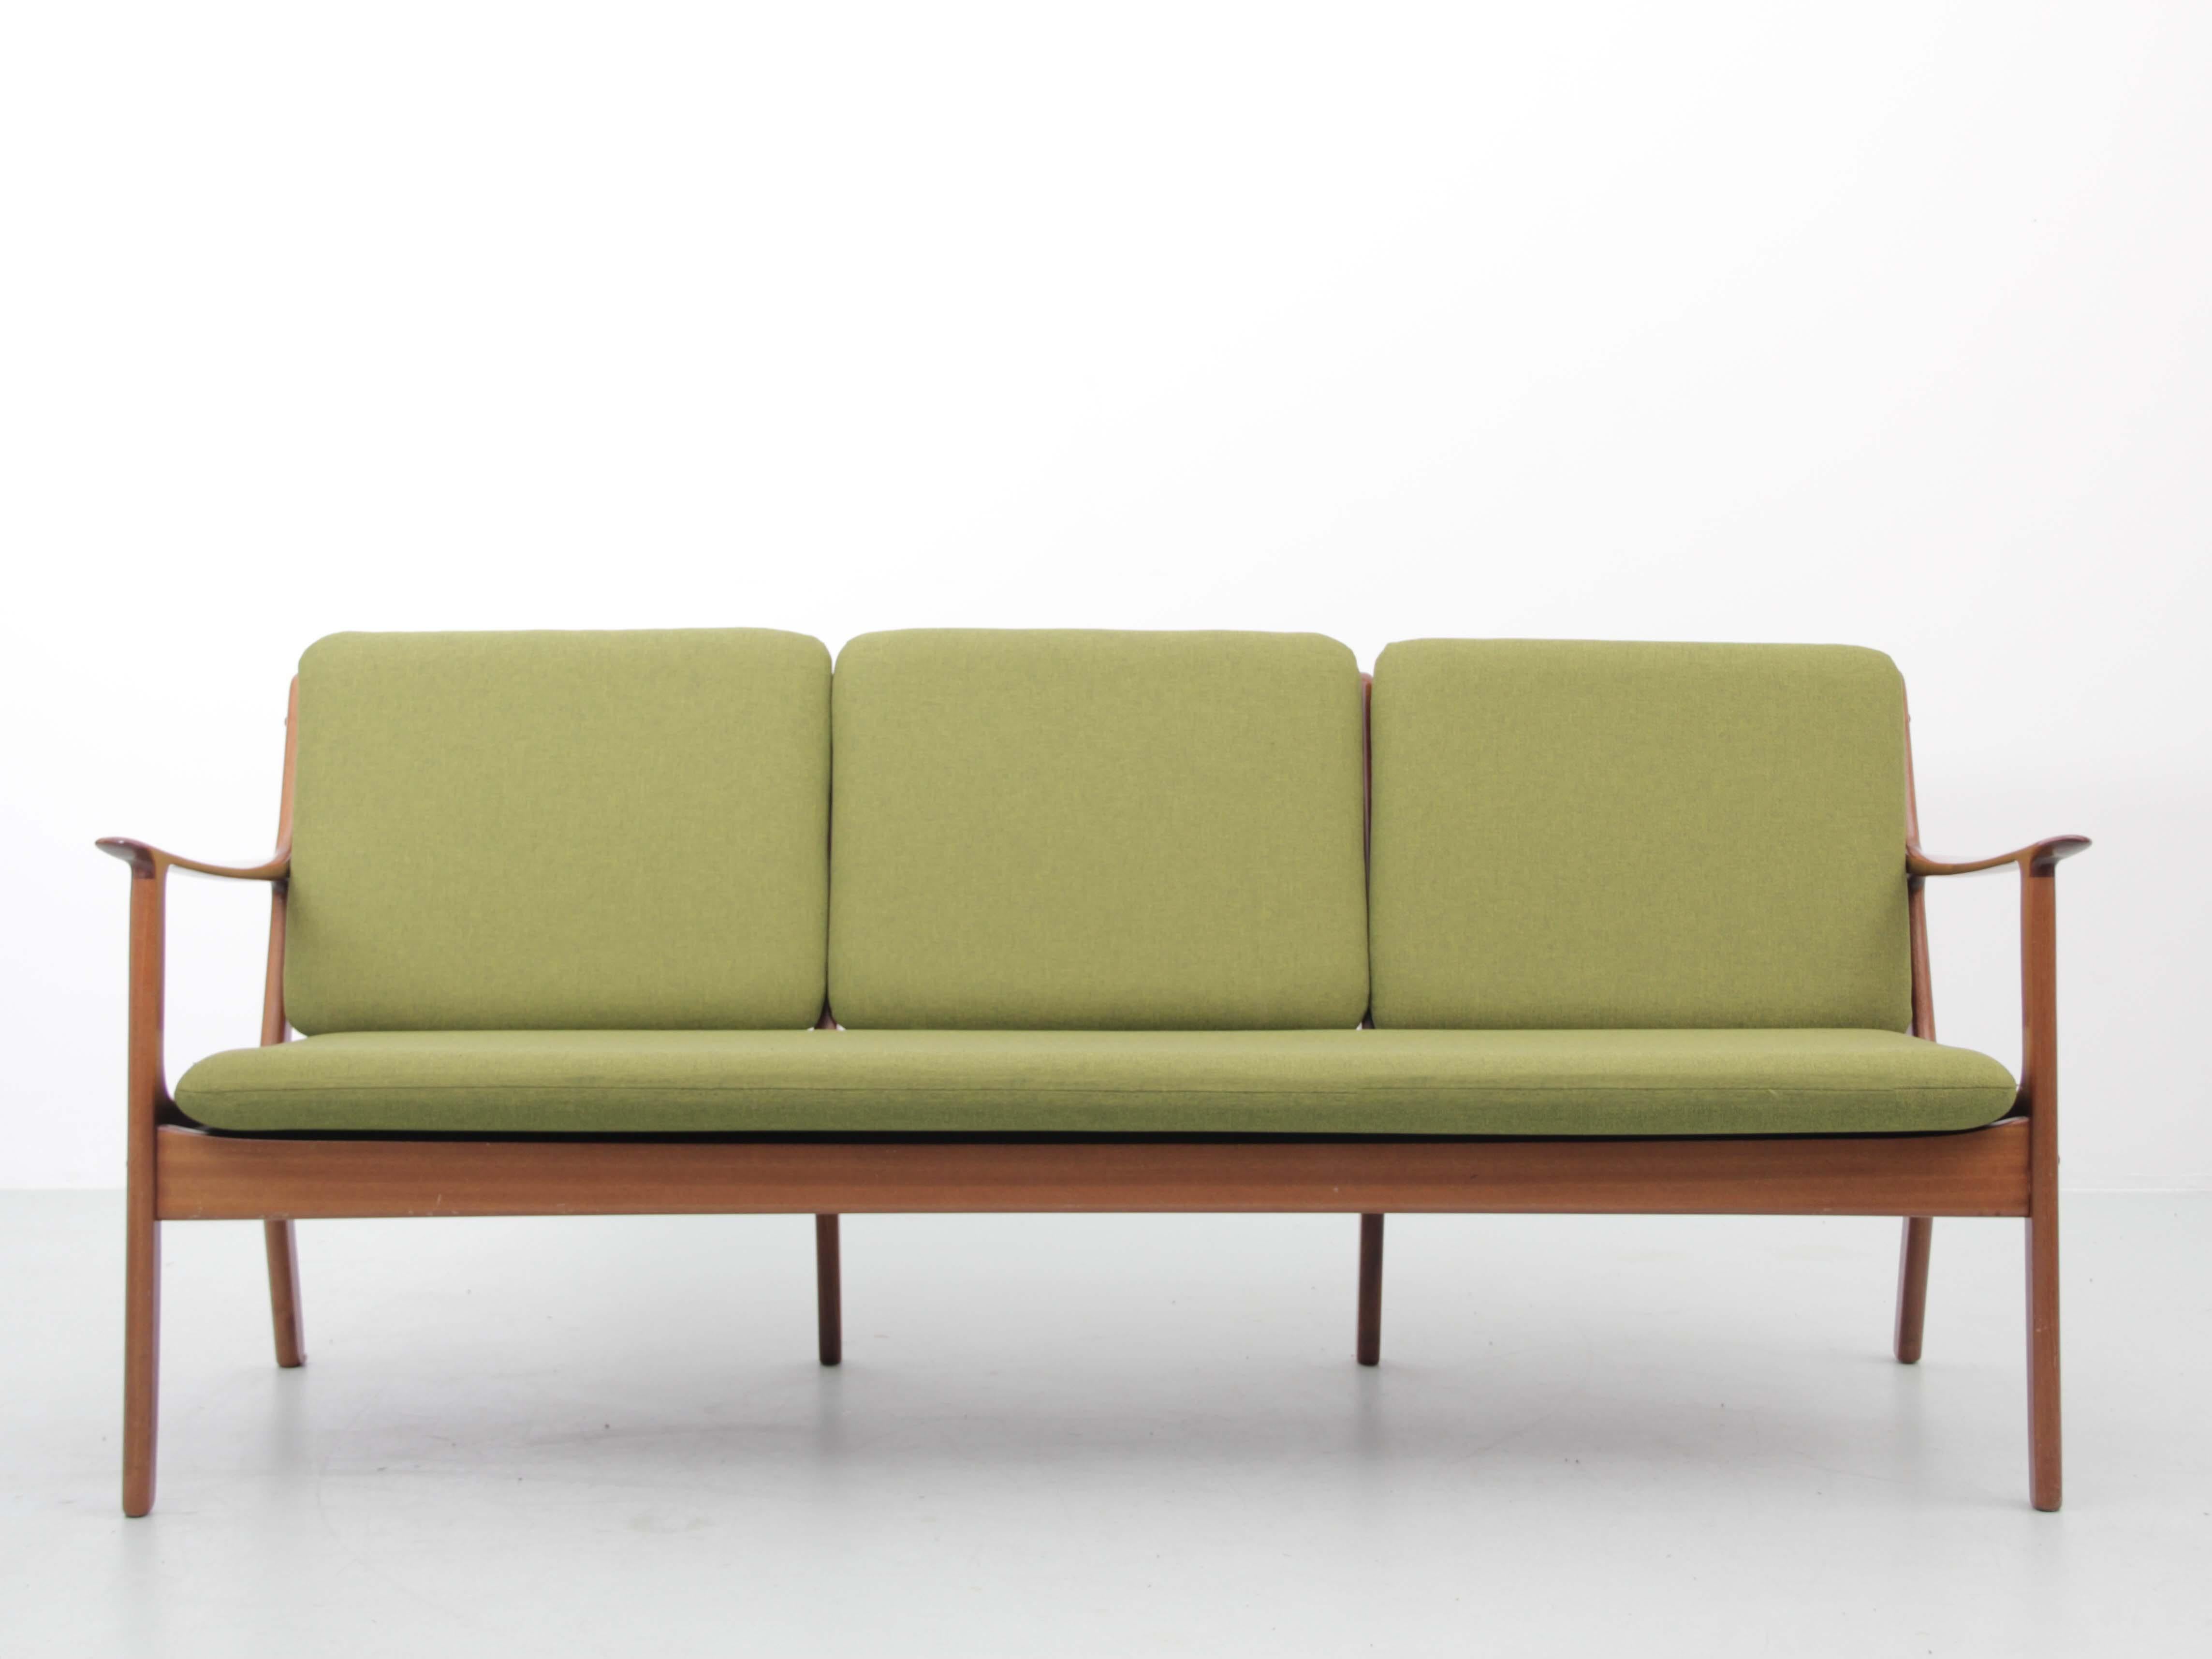 Mid-Century Modern Scandinavian PJ112 Sofa 3 Seats by Ole Wanscher In Good Condition For Sale In Courbevoie, FR